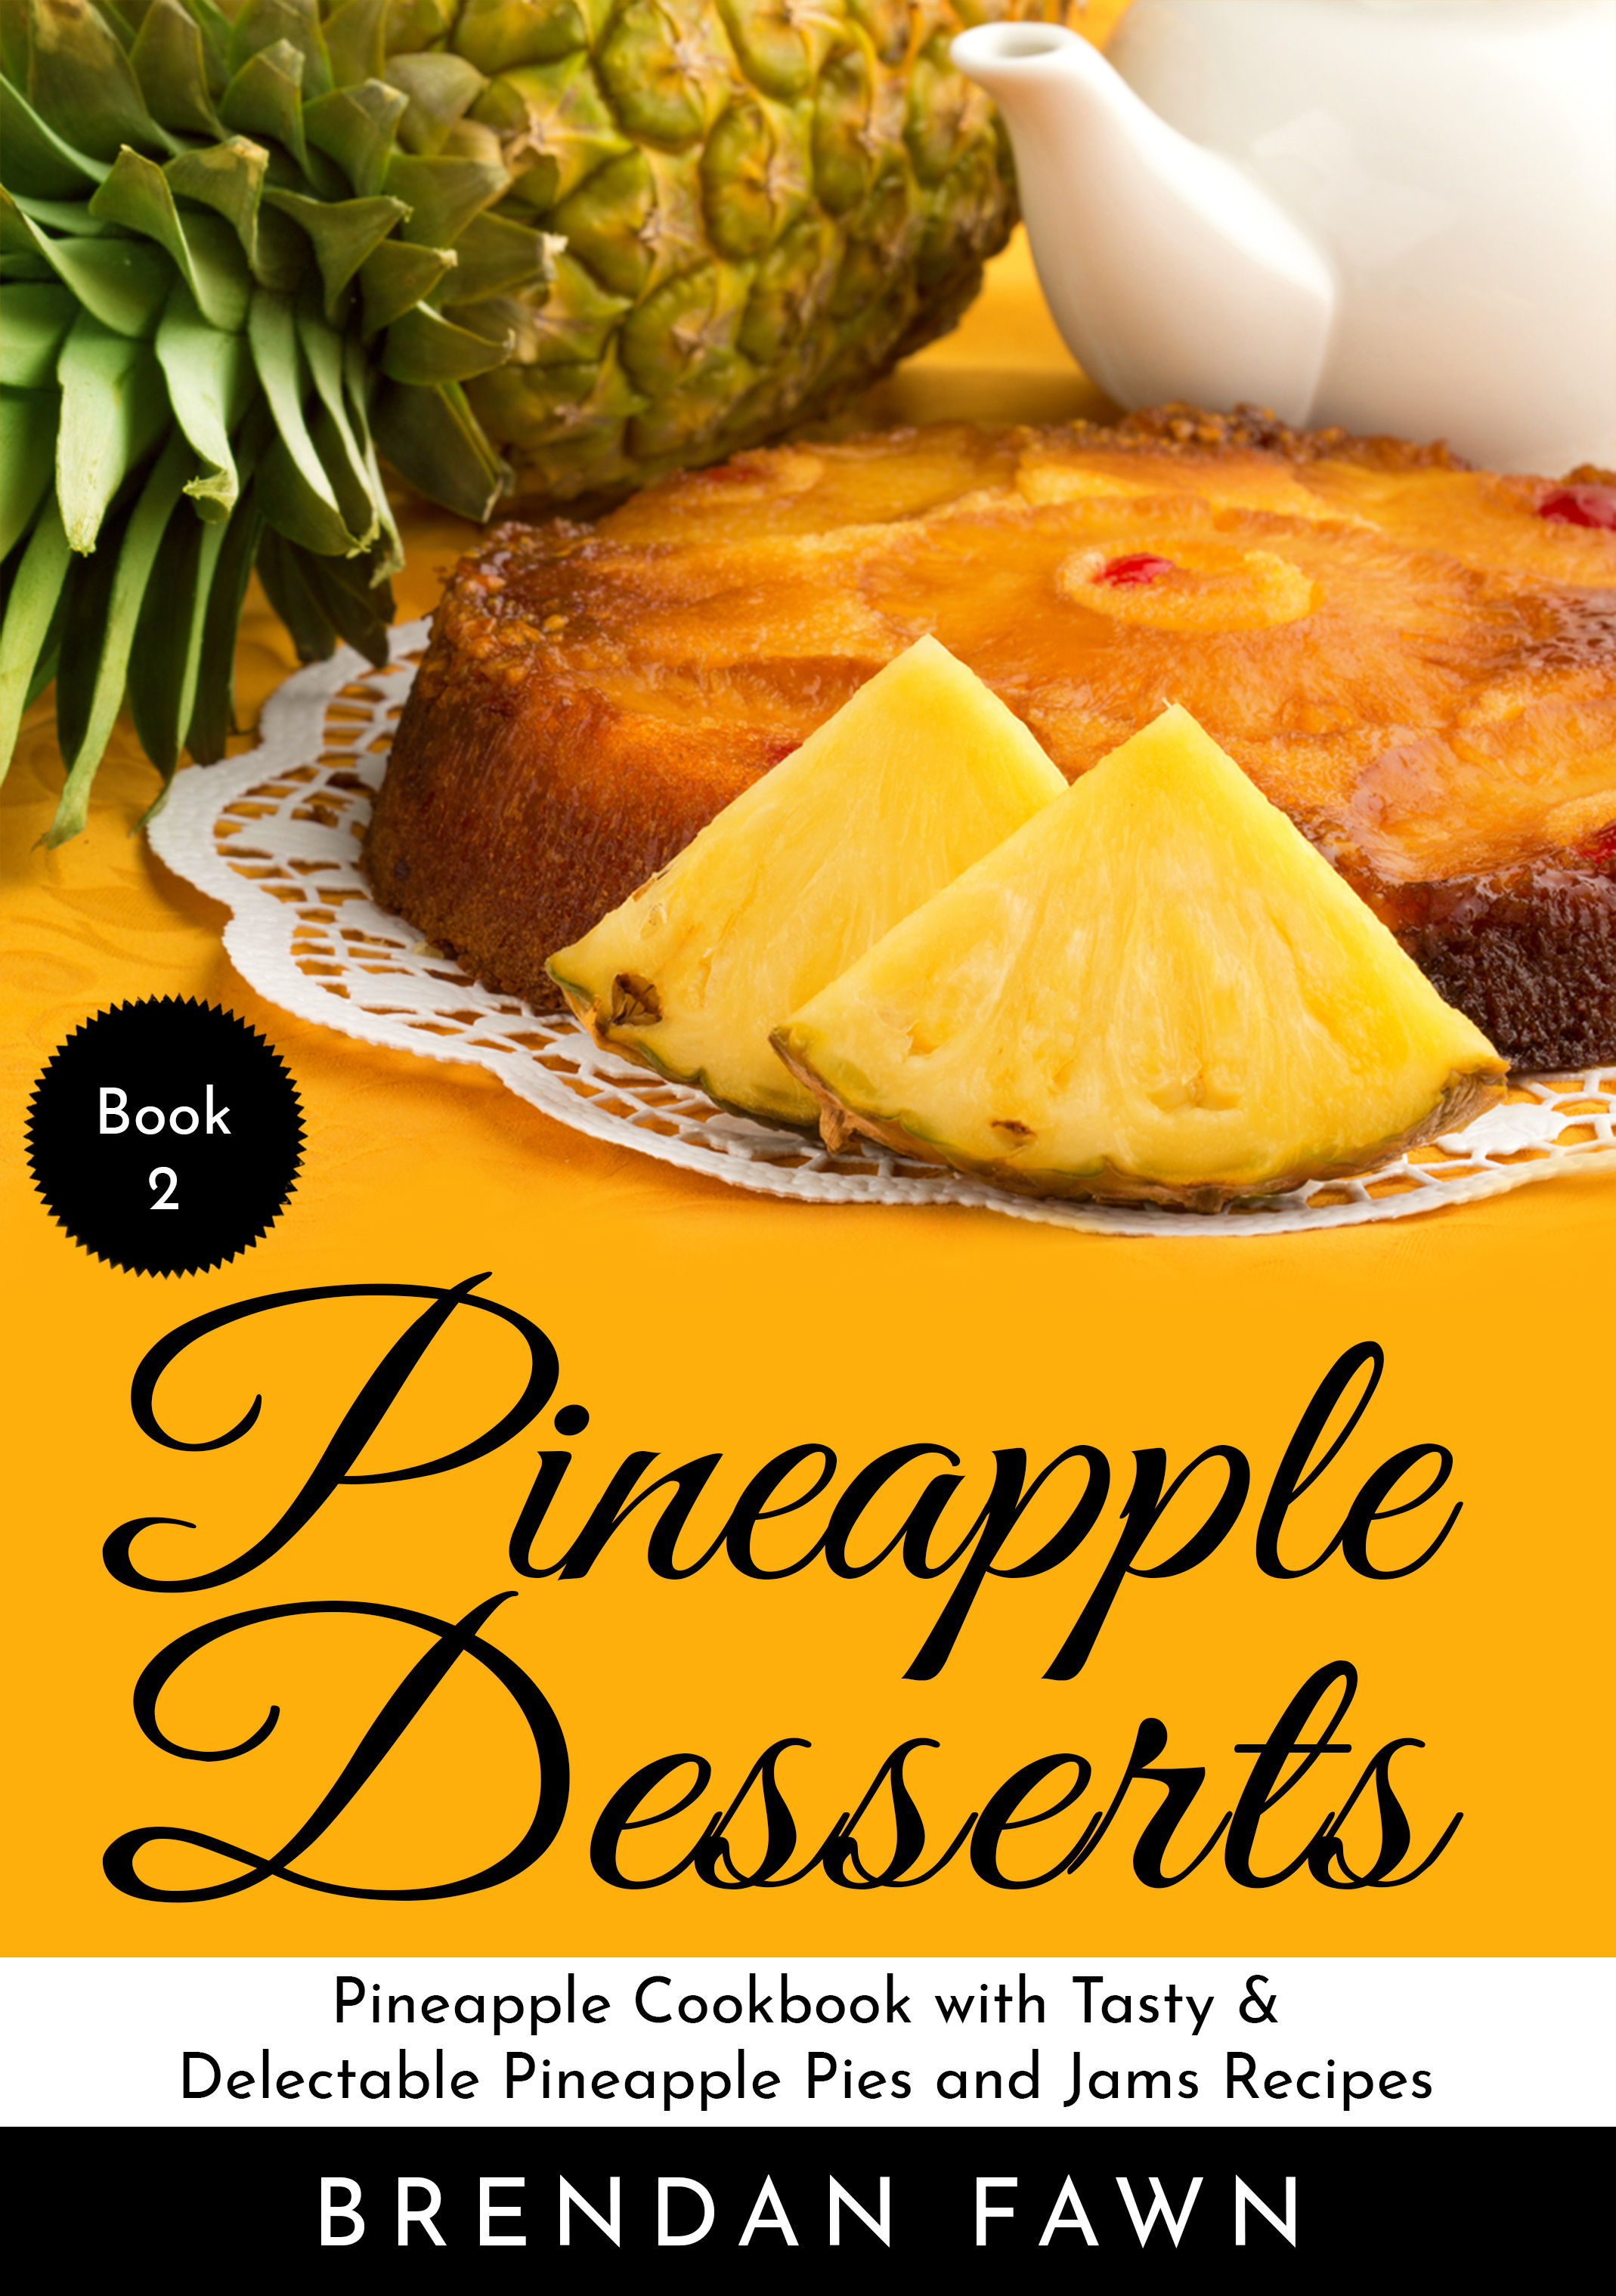 FREE: Pineapple Desserts: Pineapple Cookbook with Tasty & Delectable Pineapple Pies and Jams Recipes by Brendan Fawn